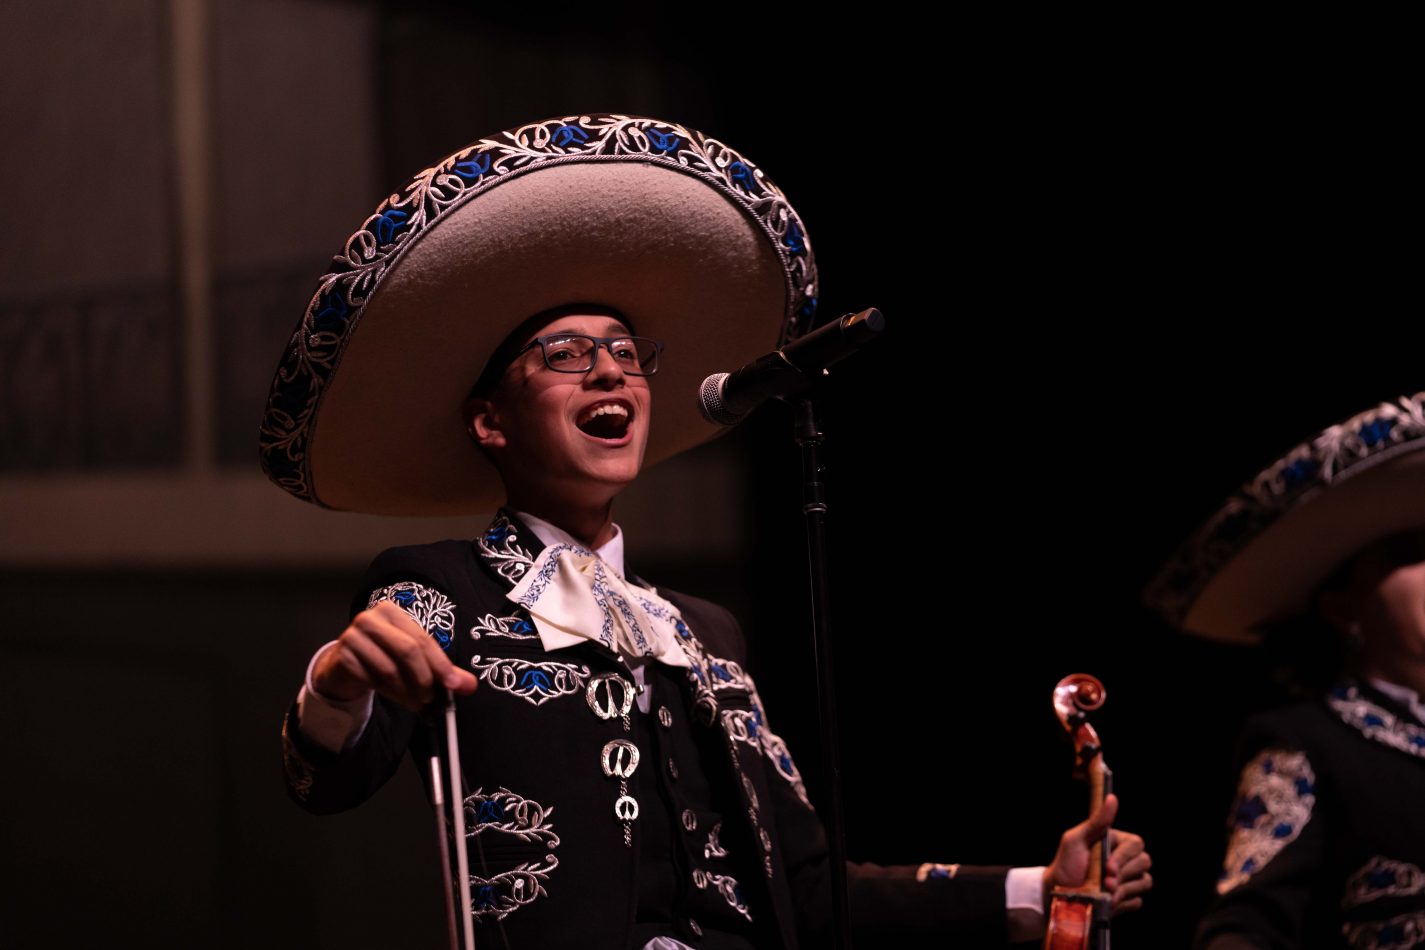 Gallery 3 - 27th Annual Mariachi Vargas Extravaganza National Group Competition